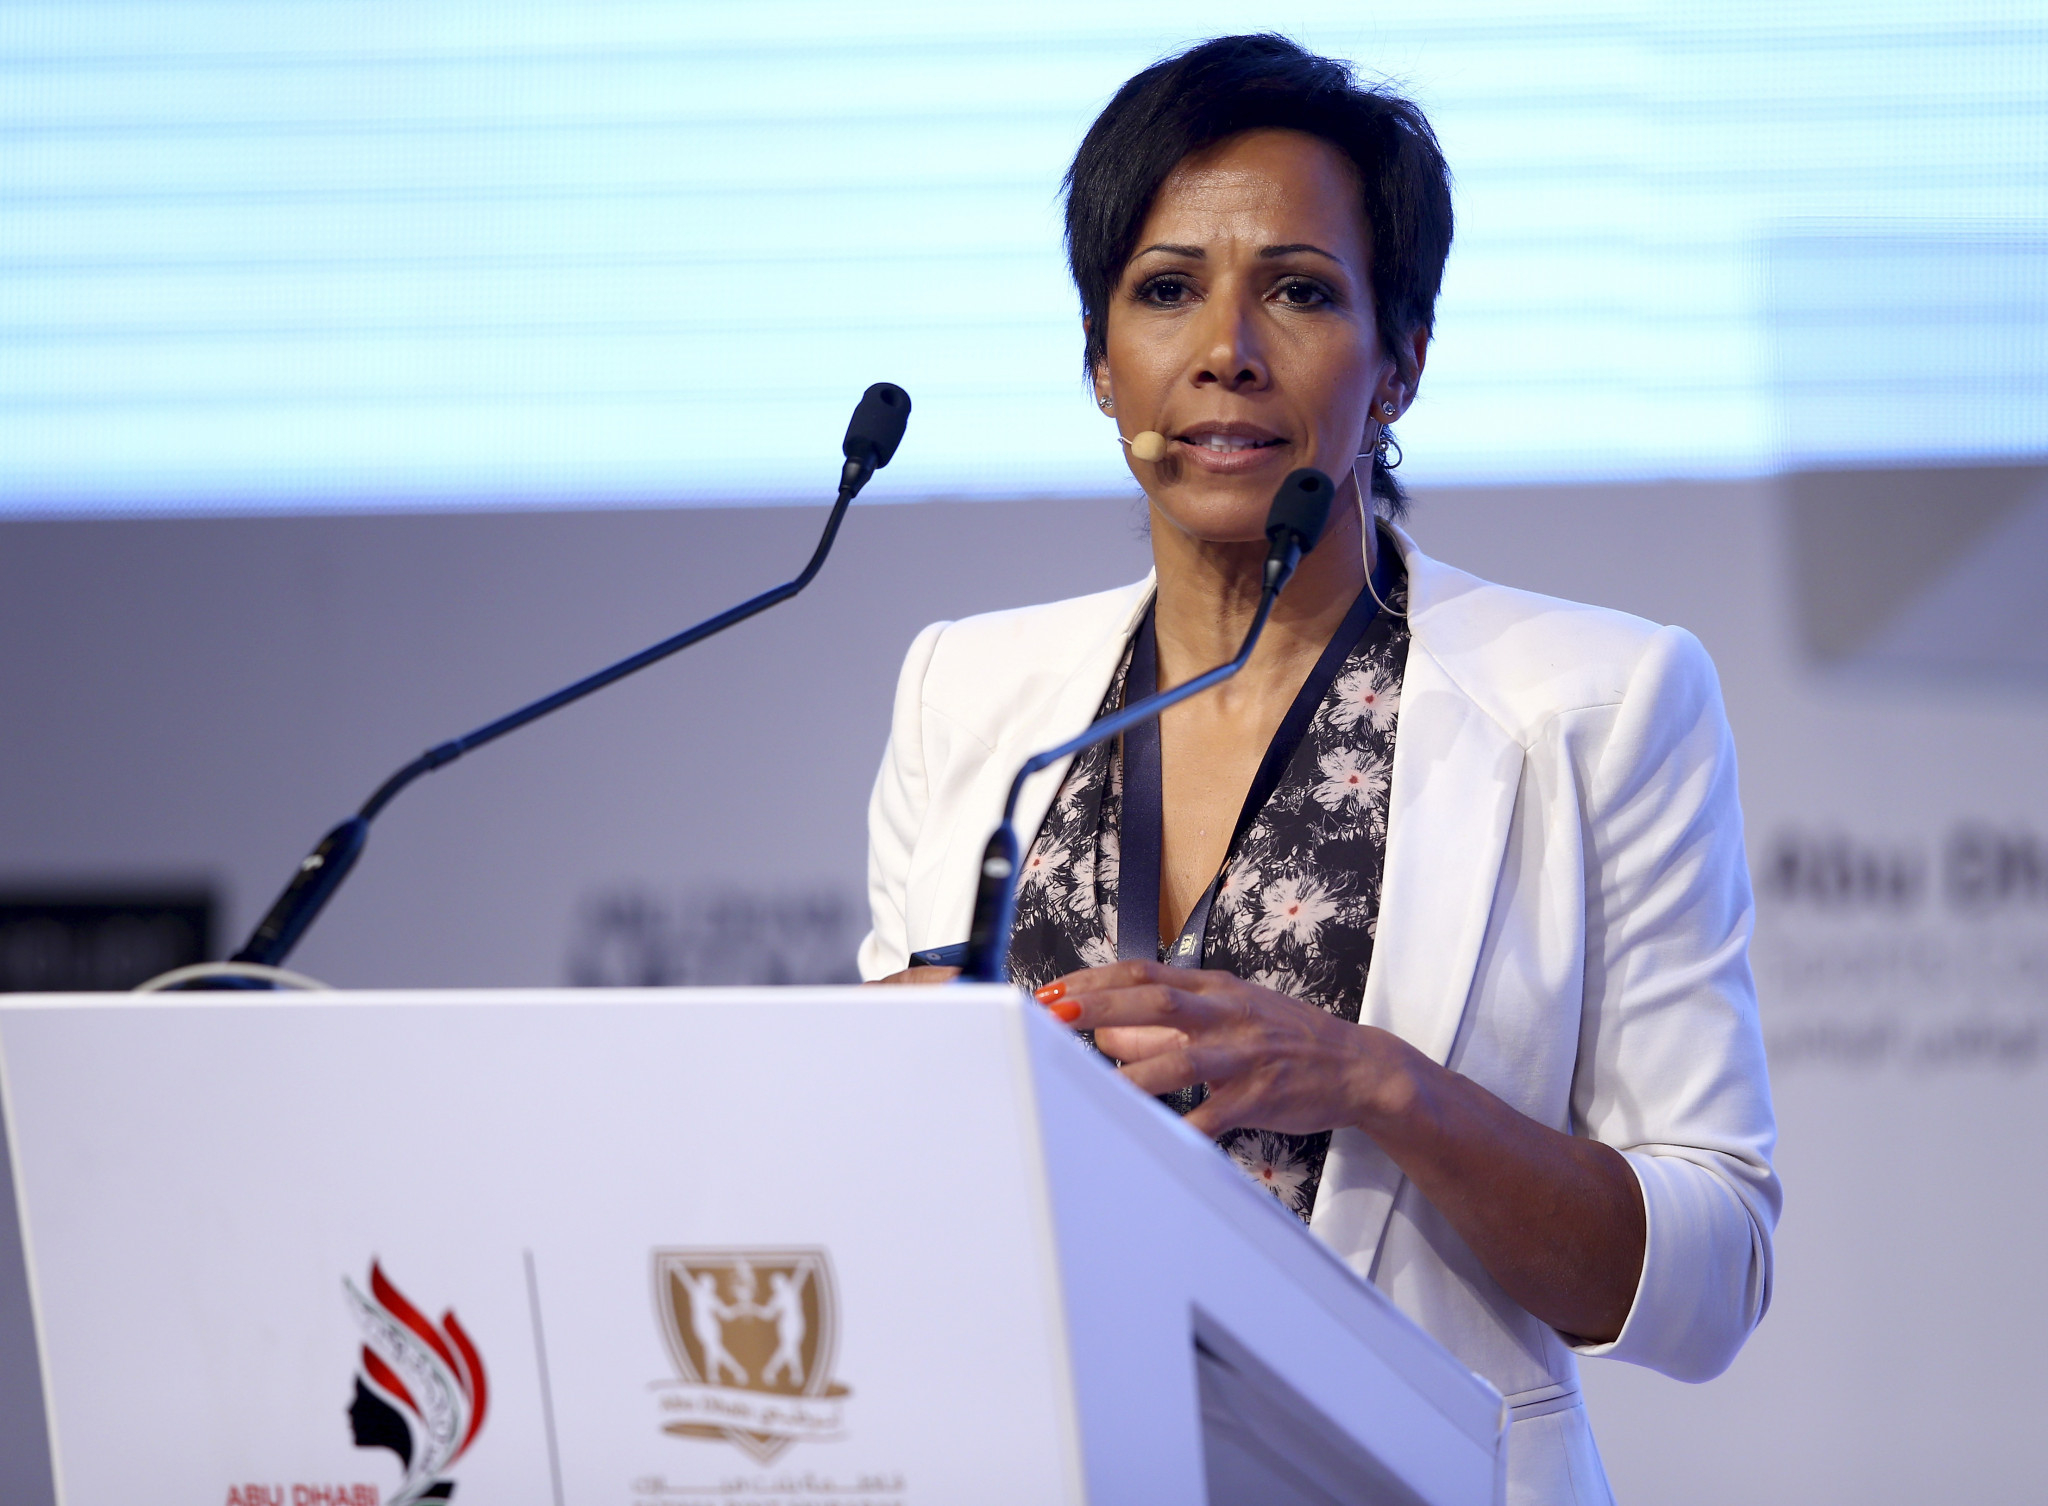 Double Olympic gold medallist Dame Kelly Holmes announces she is gay in interview